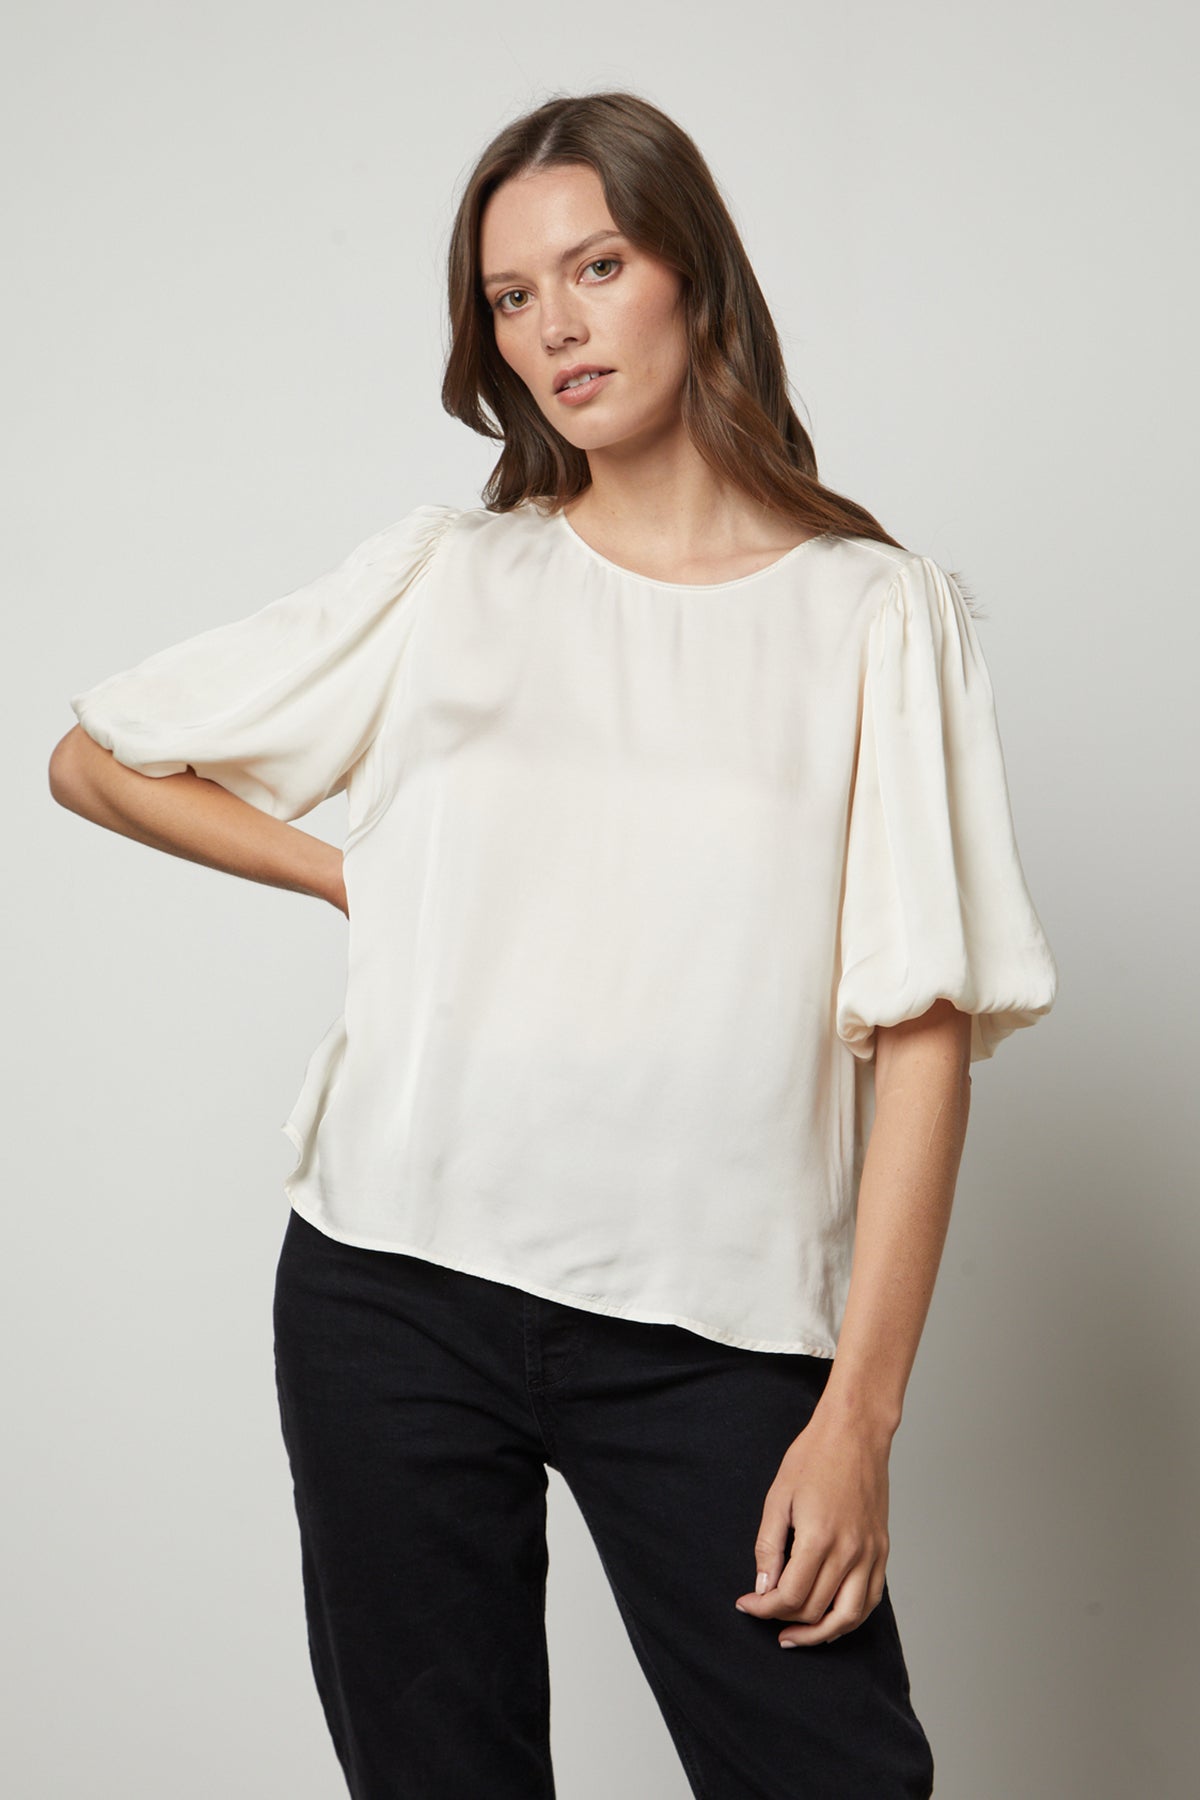 The model is wearing a DESI SATIN PUFF SLEEVE TOP by Velvet by Graham & Spencer.-35656169554113